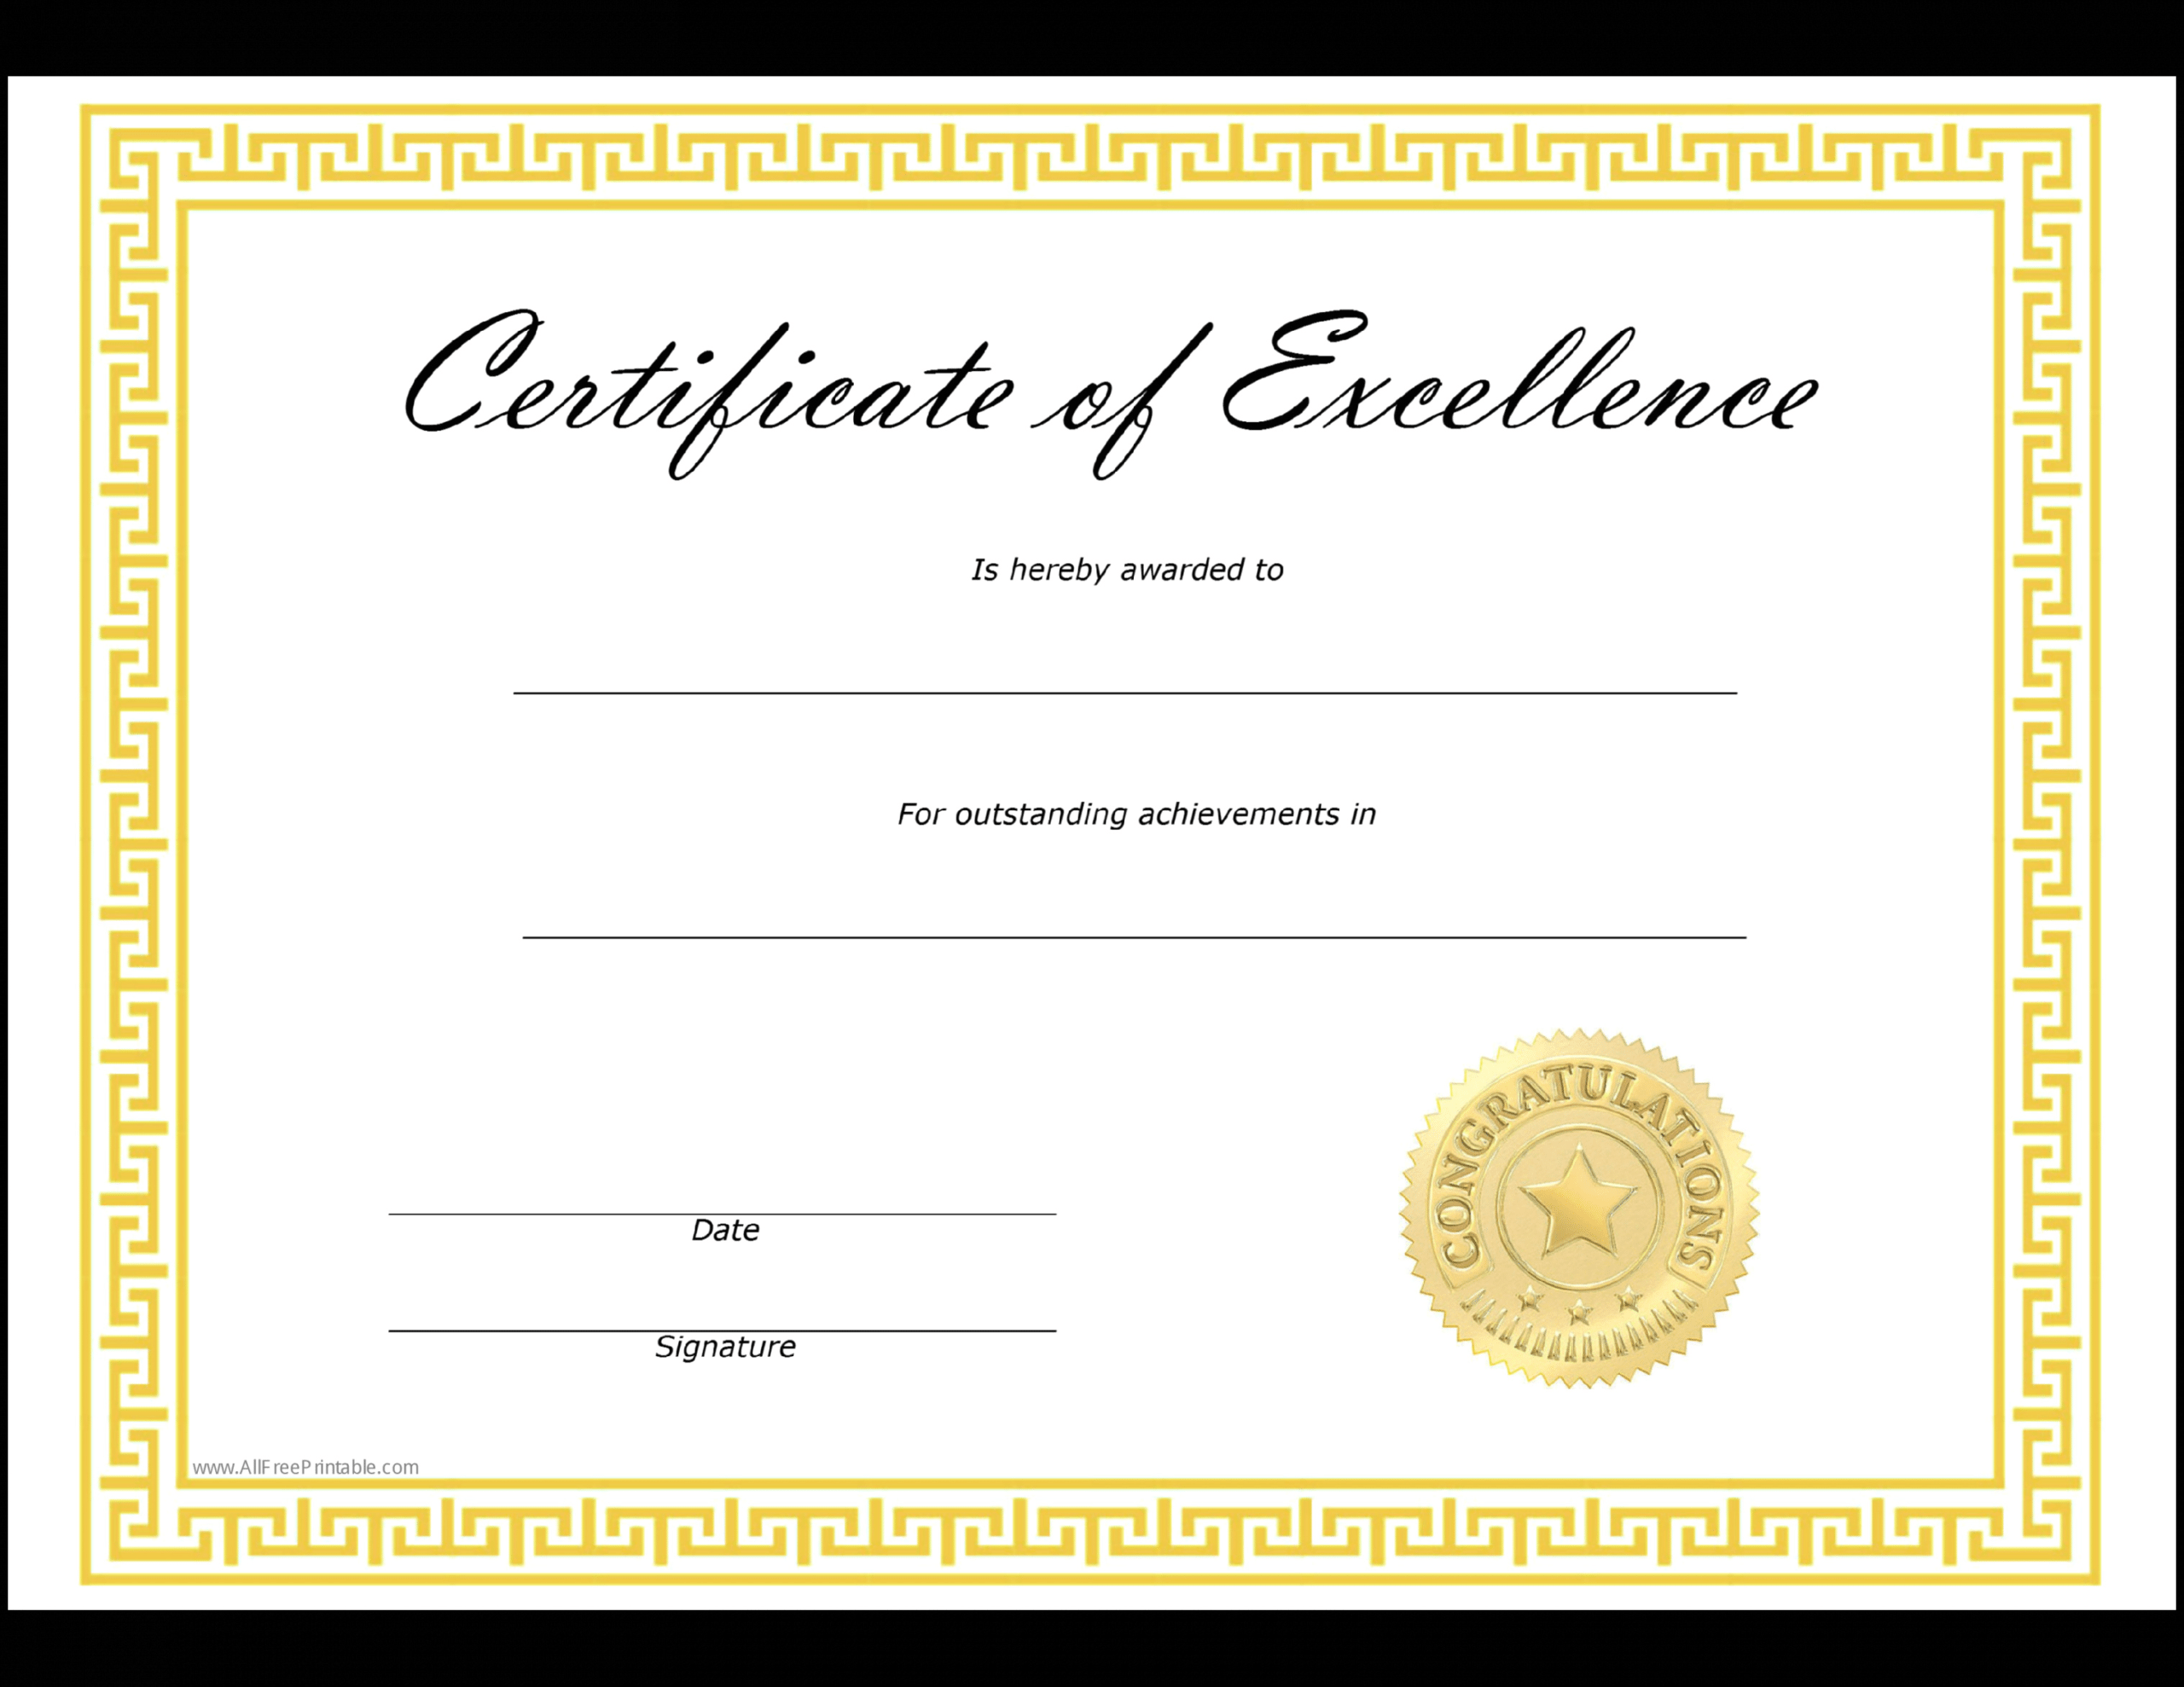 ged-certificate-template